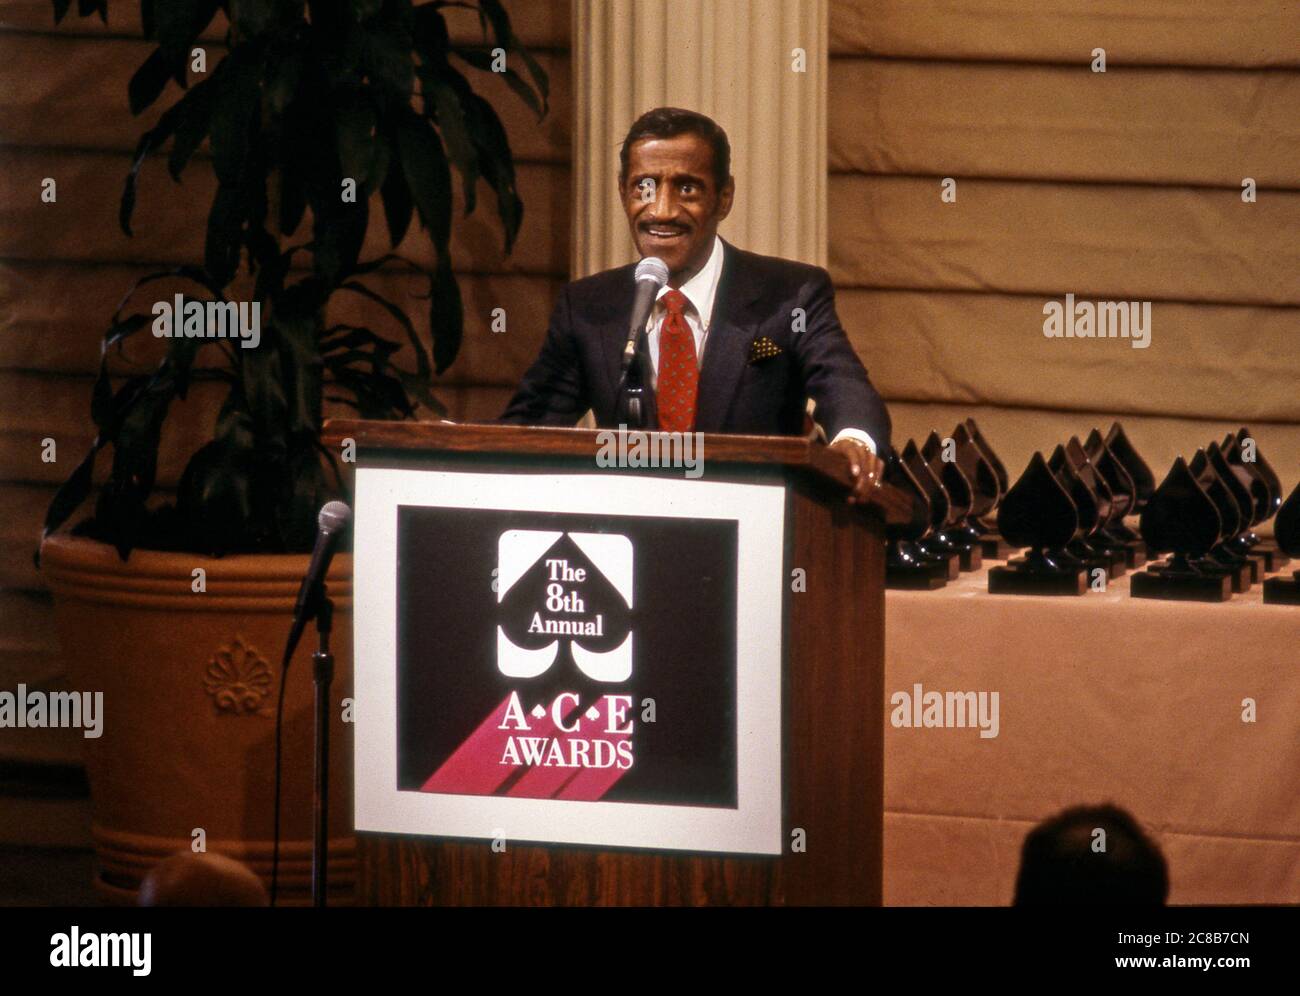 Sammy Davis Jr. at 8th Annual Cable Ace Awards ceremony. Stock Photo